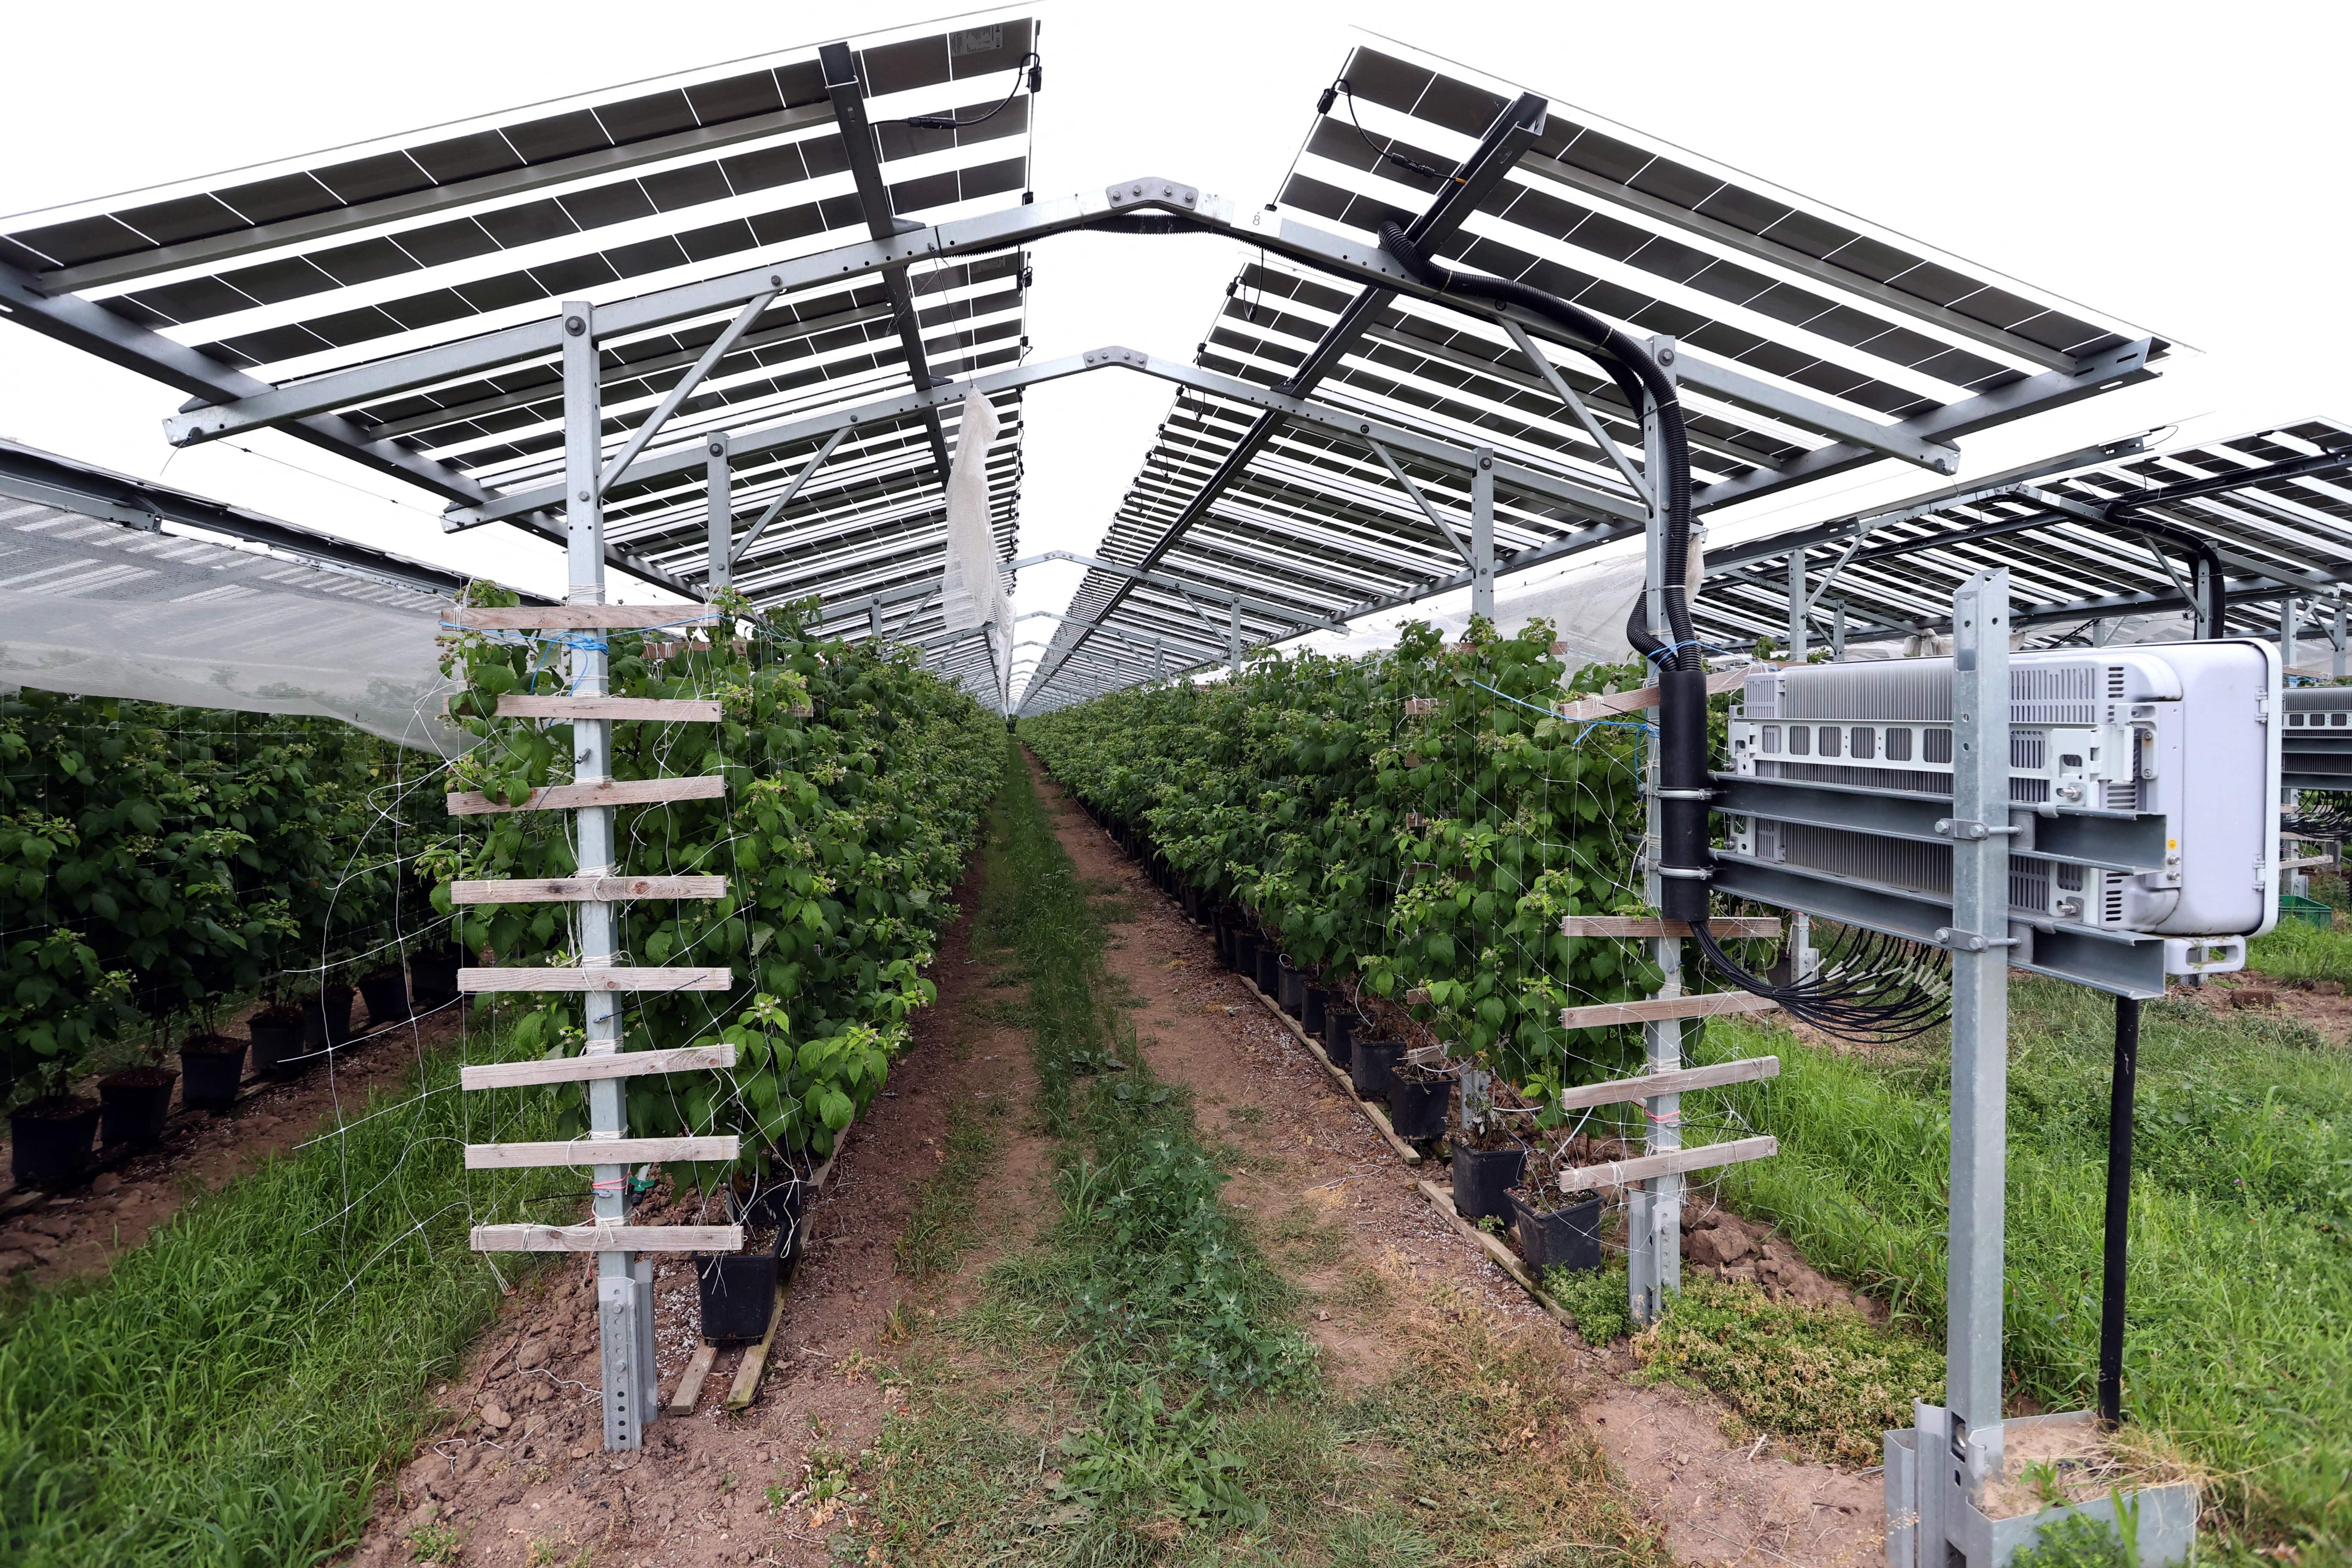 Solar panels cover rows of leafy crops.